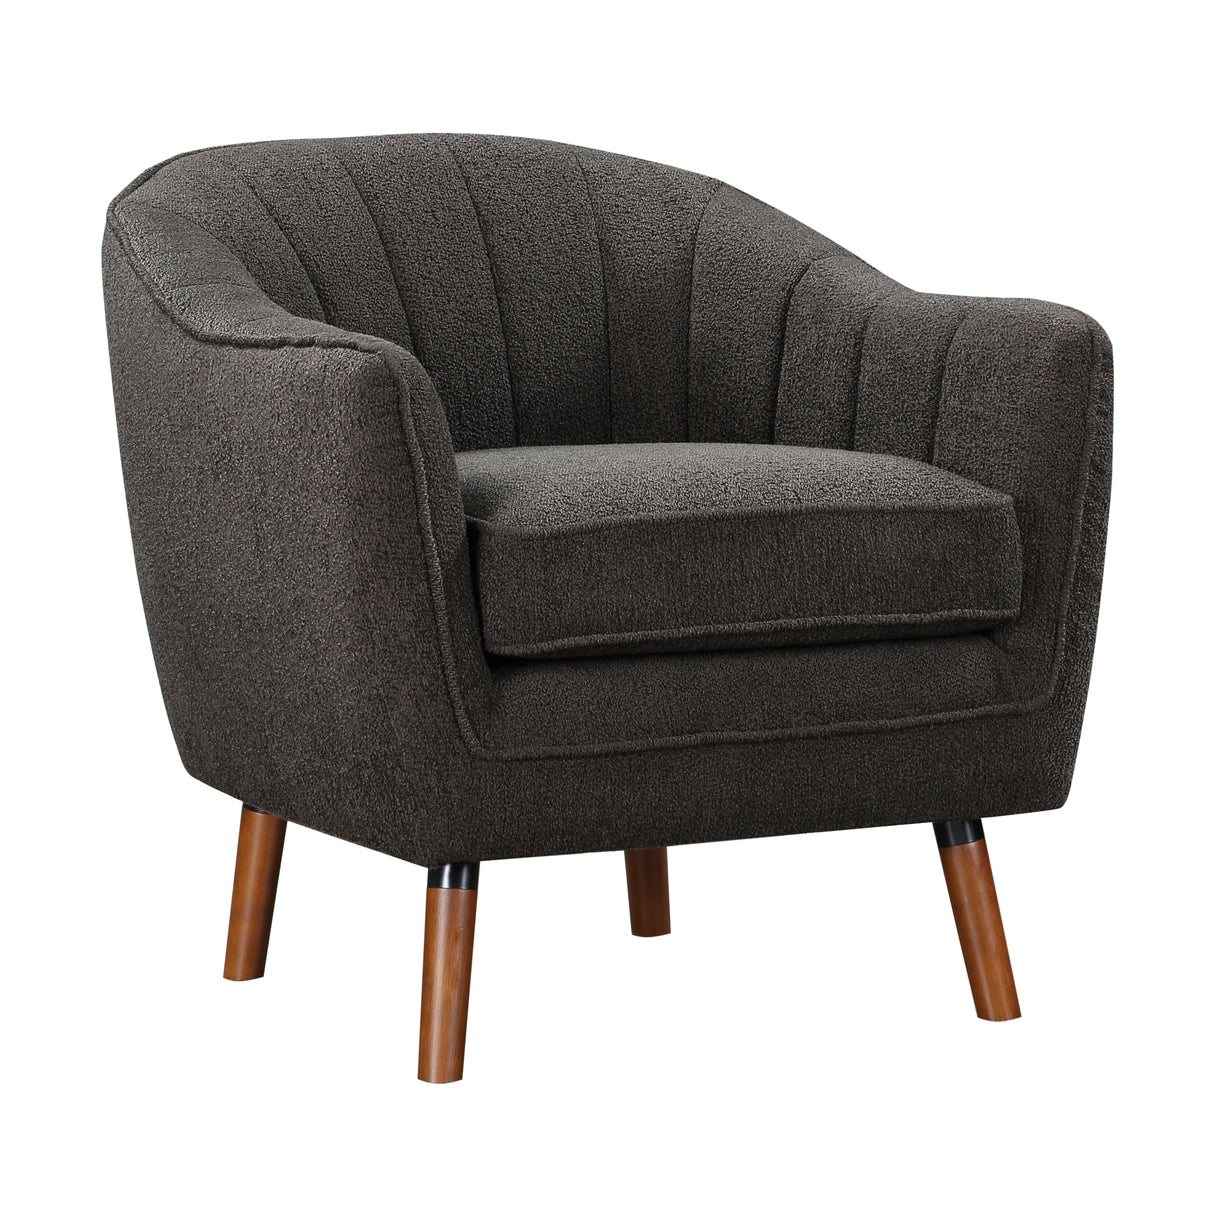 Cutler Charcoal Accent Chair